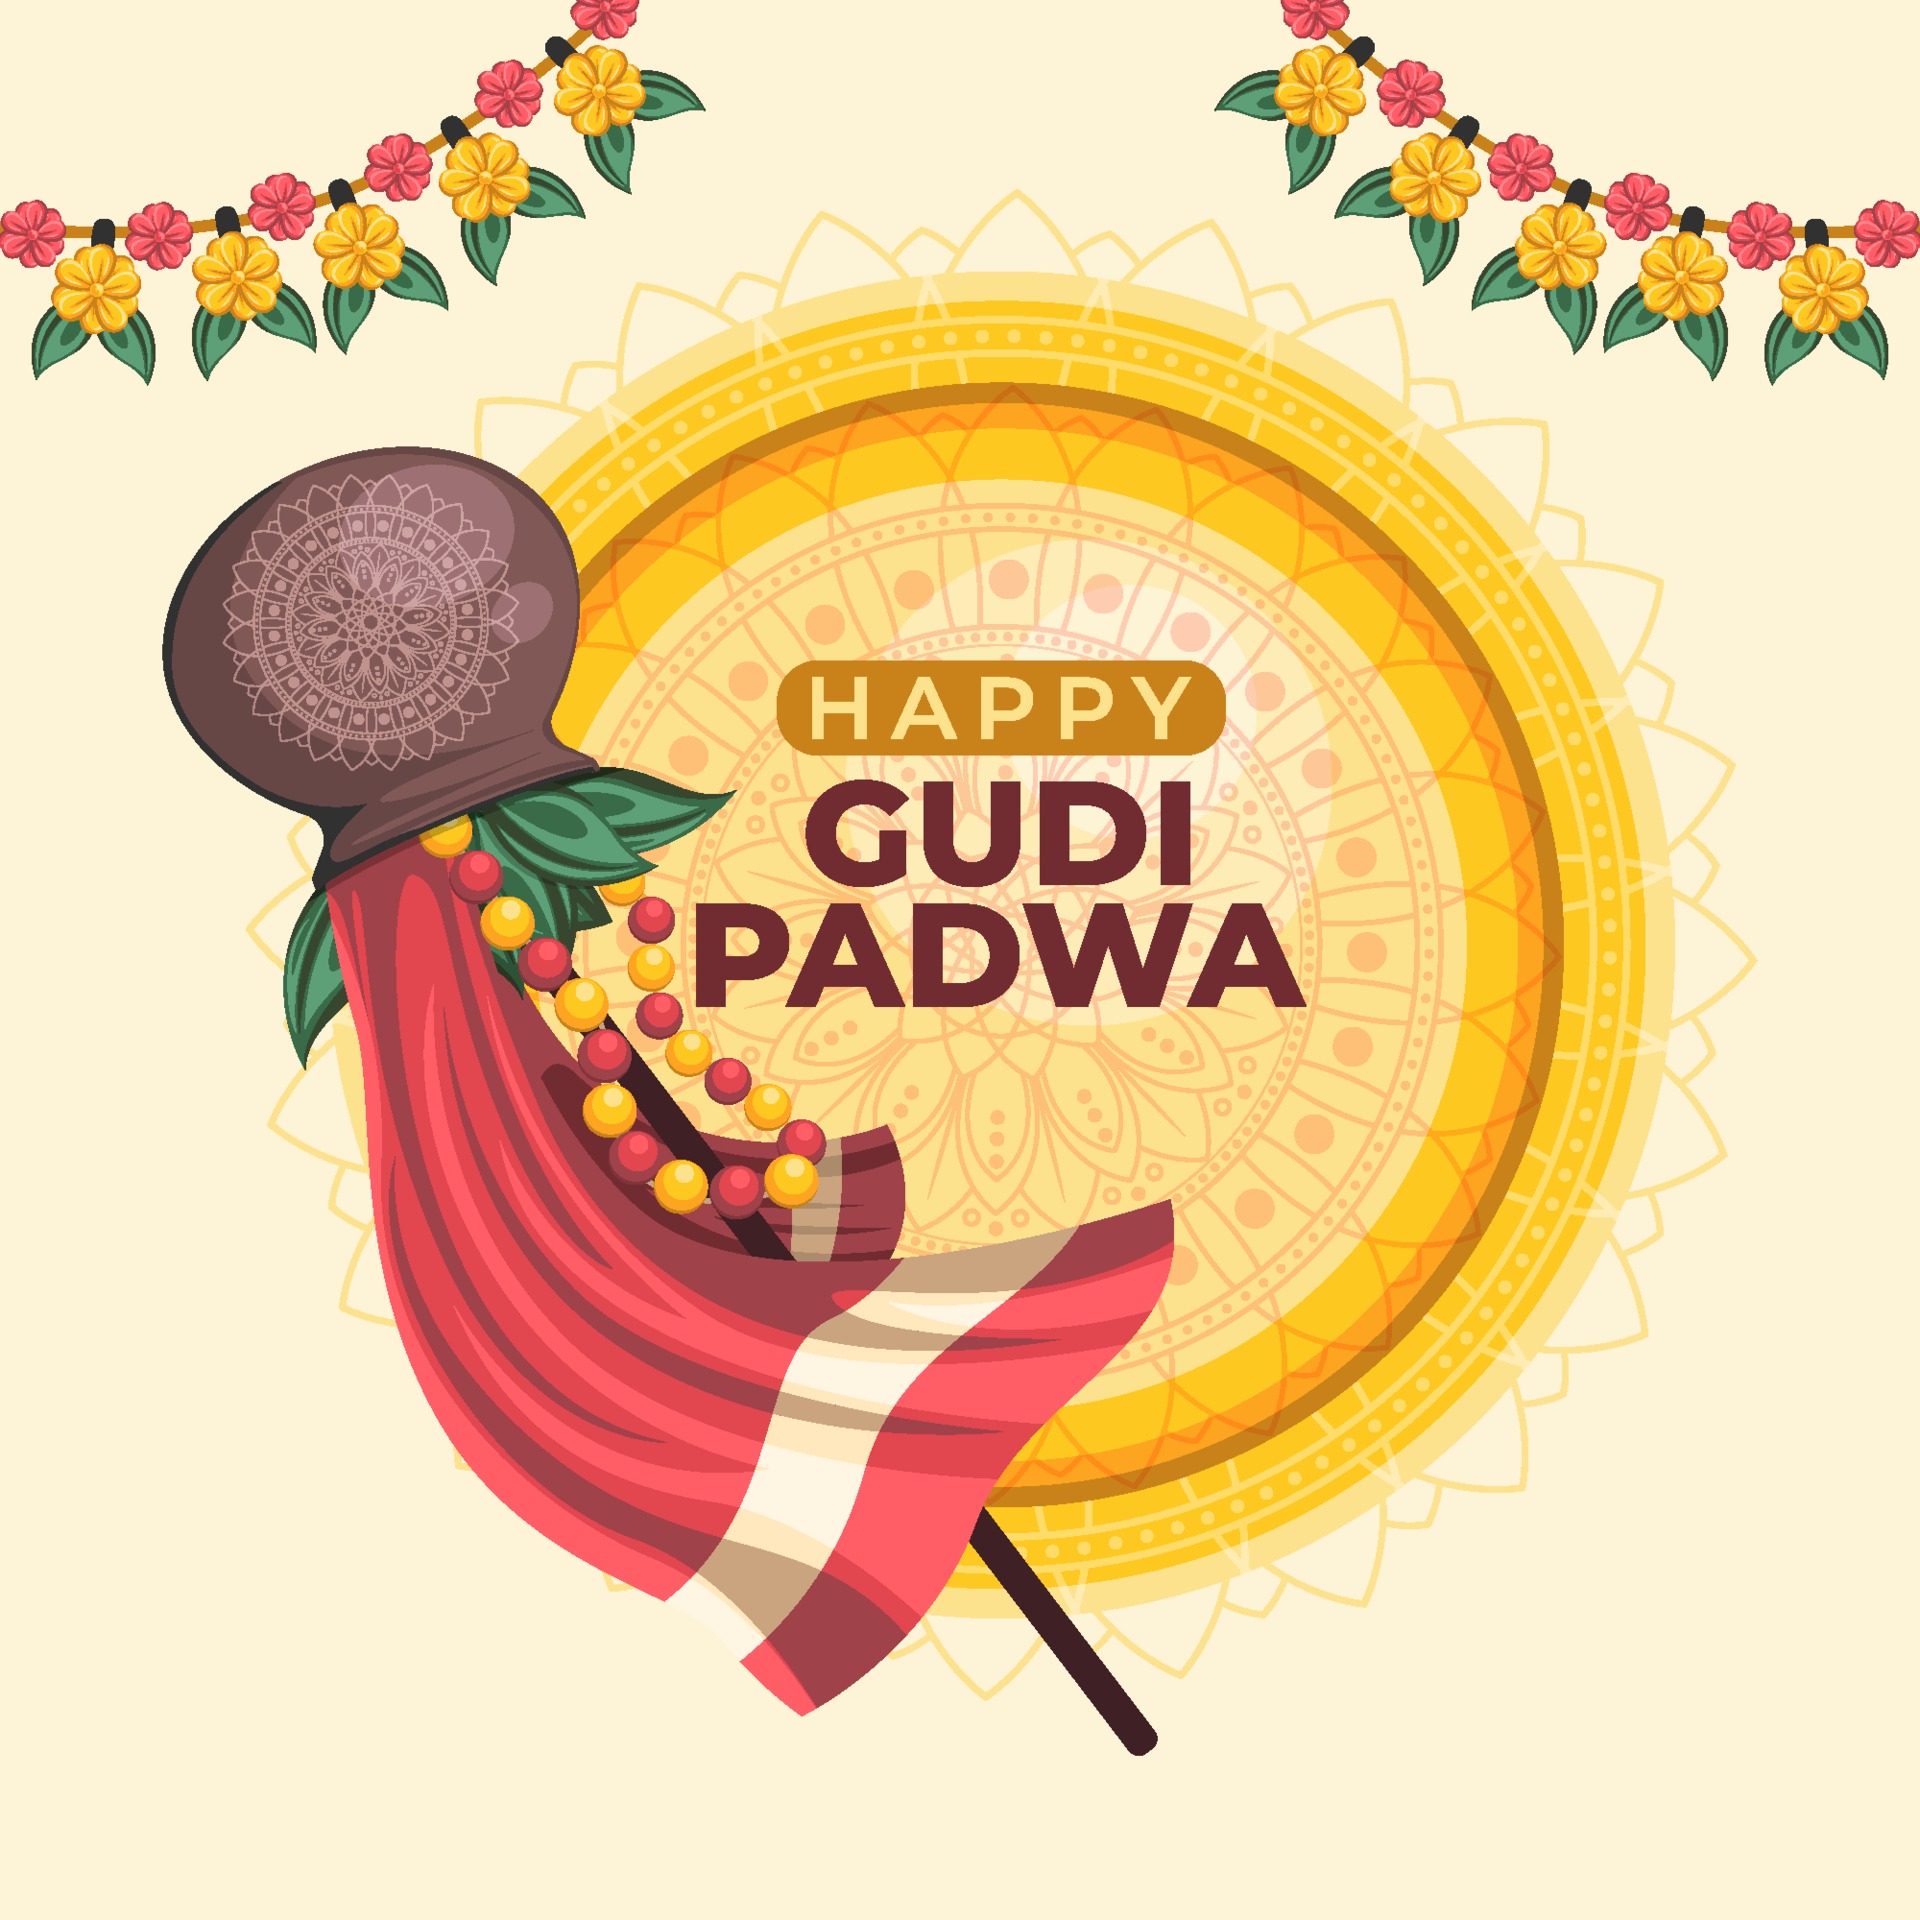 Gradient Background For Indian Gudi Padwa Festival India Gudi Padwa  Festival Background Background Image for Free Download